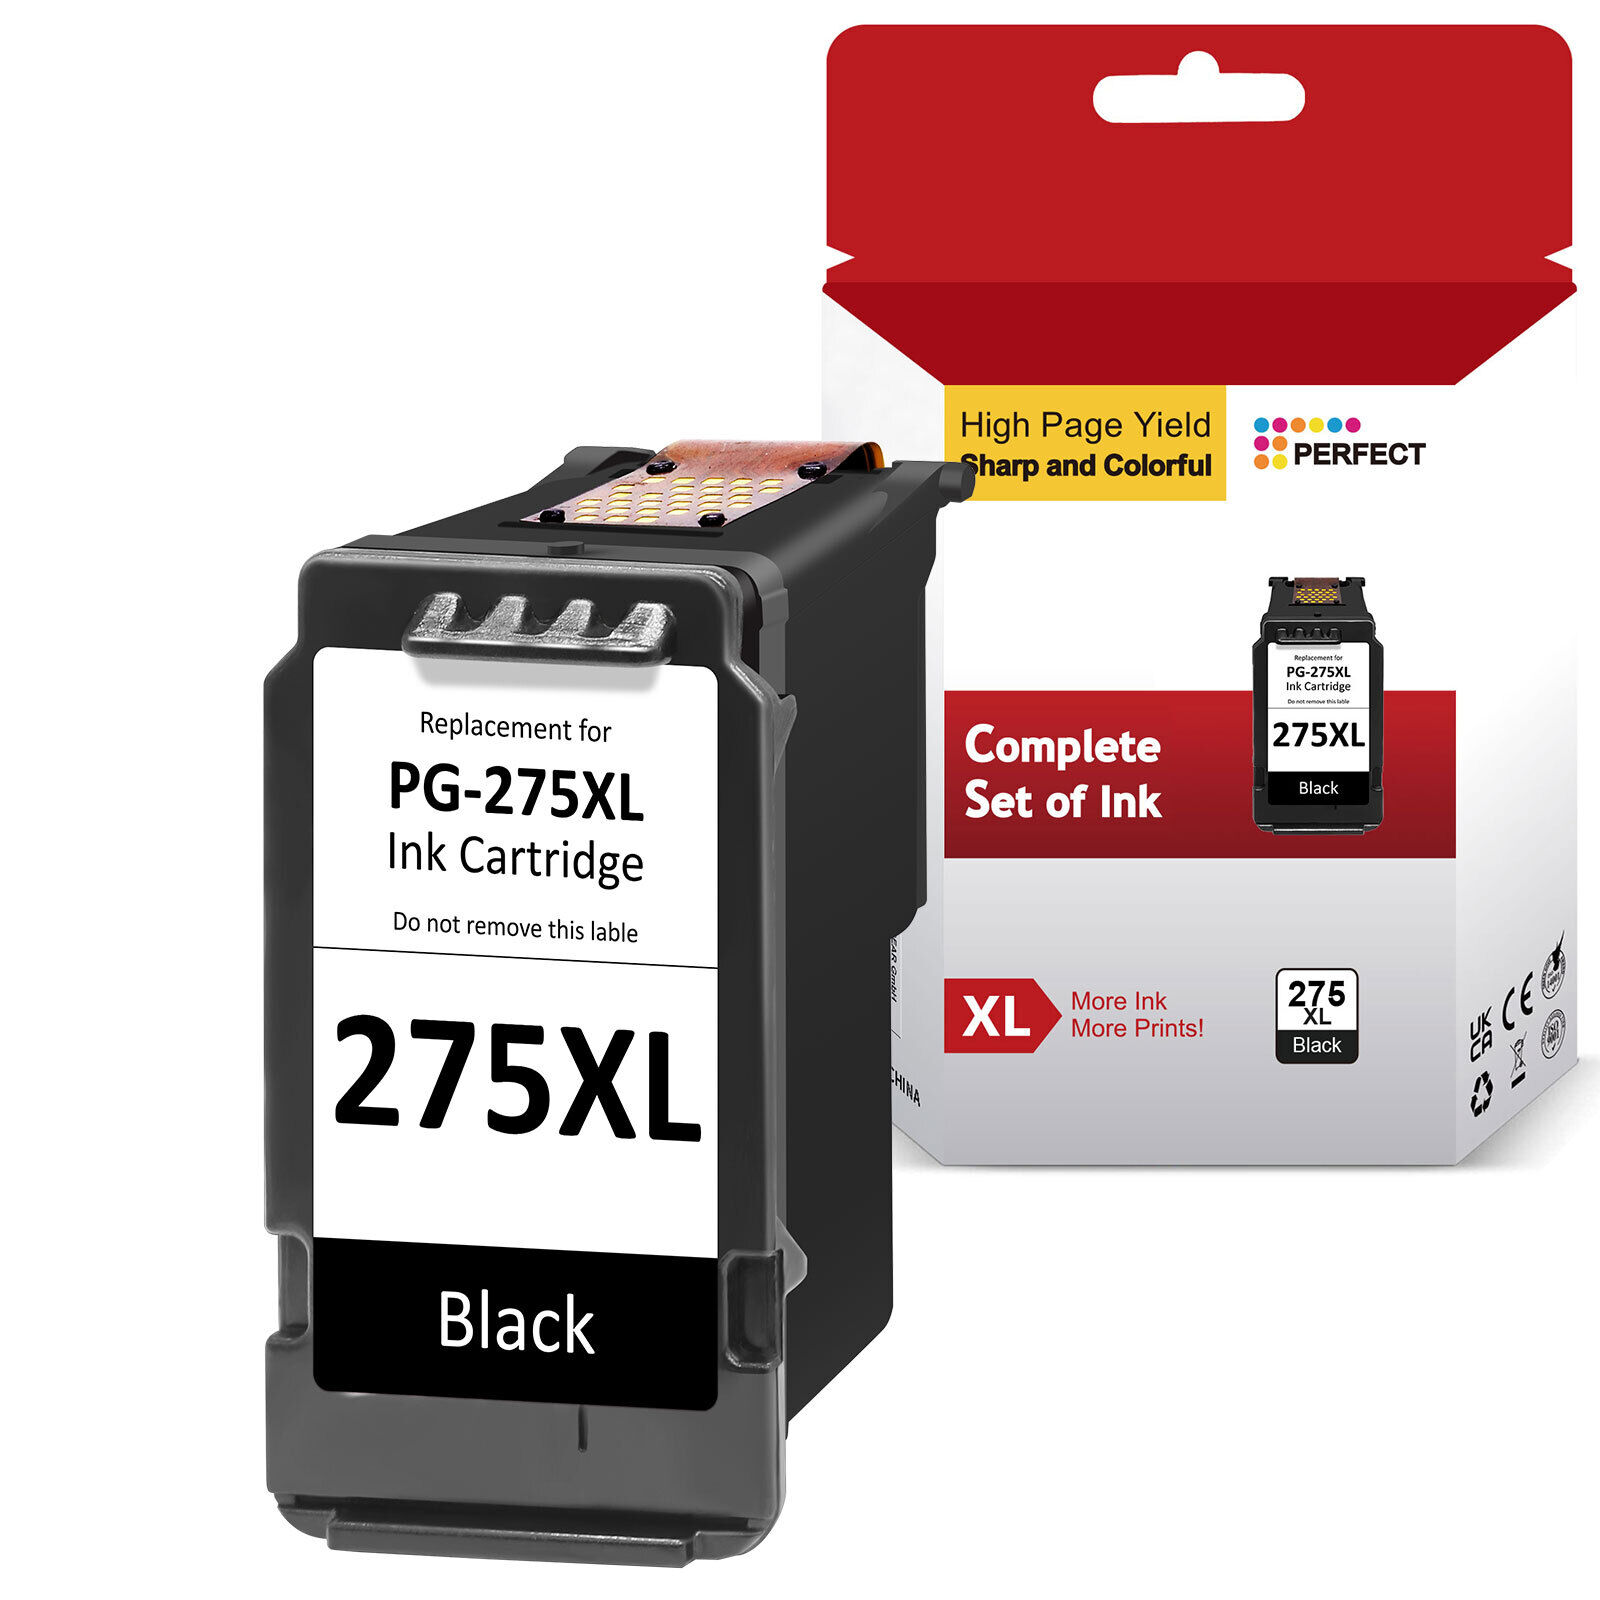 PG-275XL Black Ink Cartridge Replacement for Canon 275 276 PIXMA TR4720 TS3500